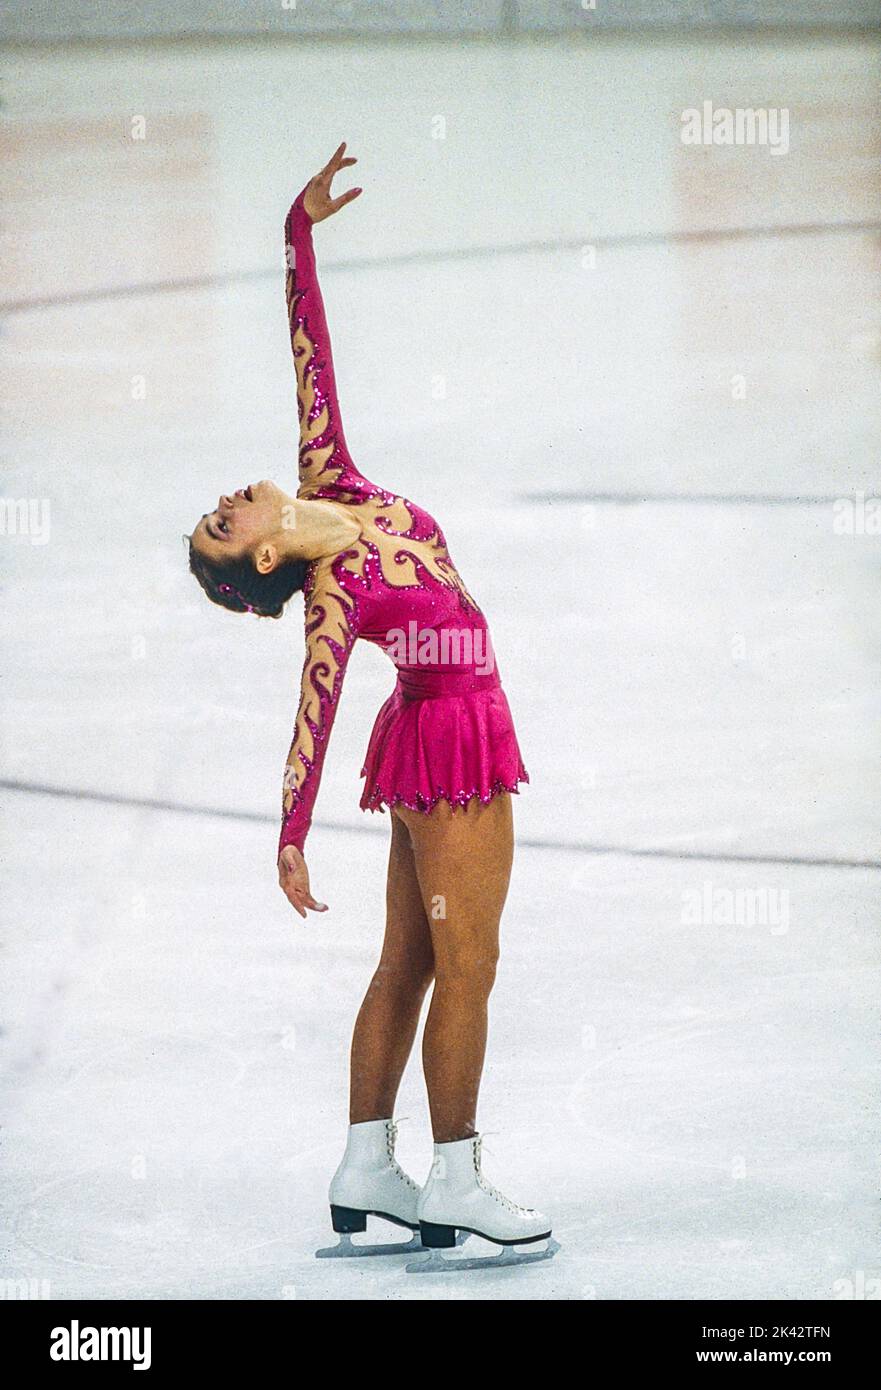 Katarina Witt (GDR) Gold medalist and Olympic Champion competing in the Ladies Figure Skating Free Skate at the 1984 Olympic Winter Games. Stock Photo